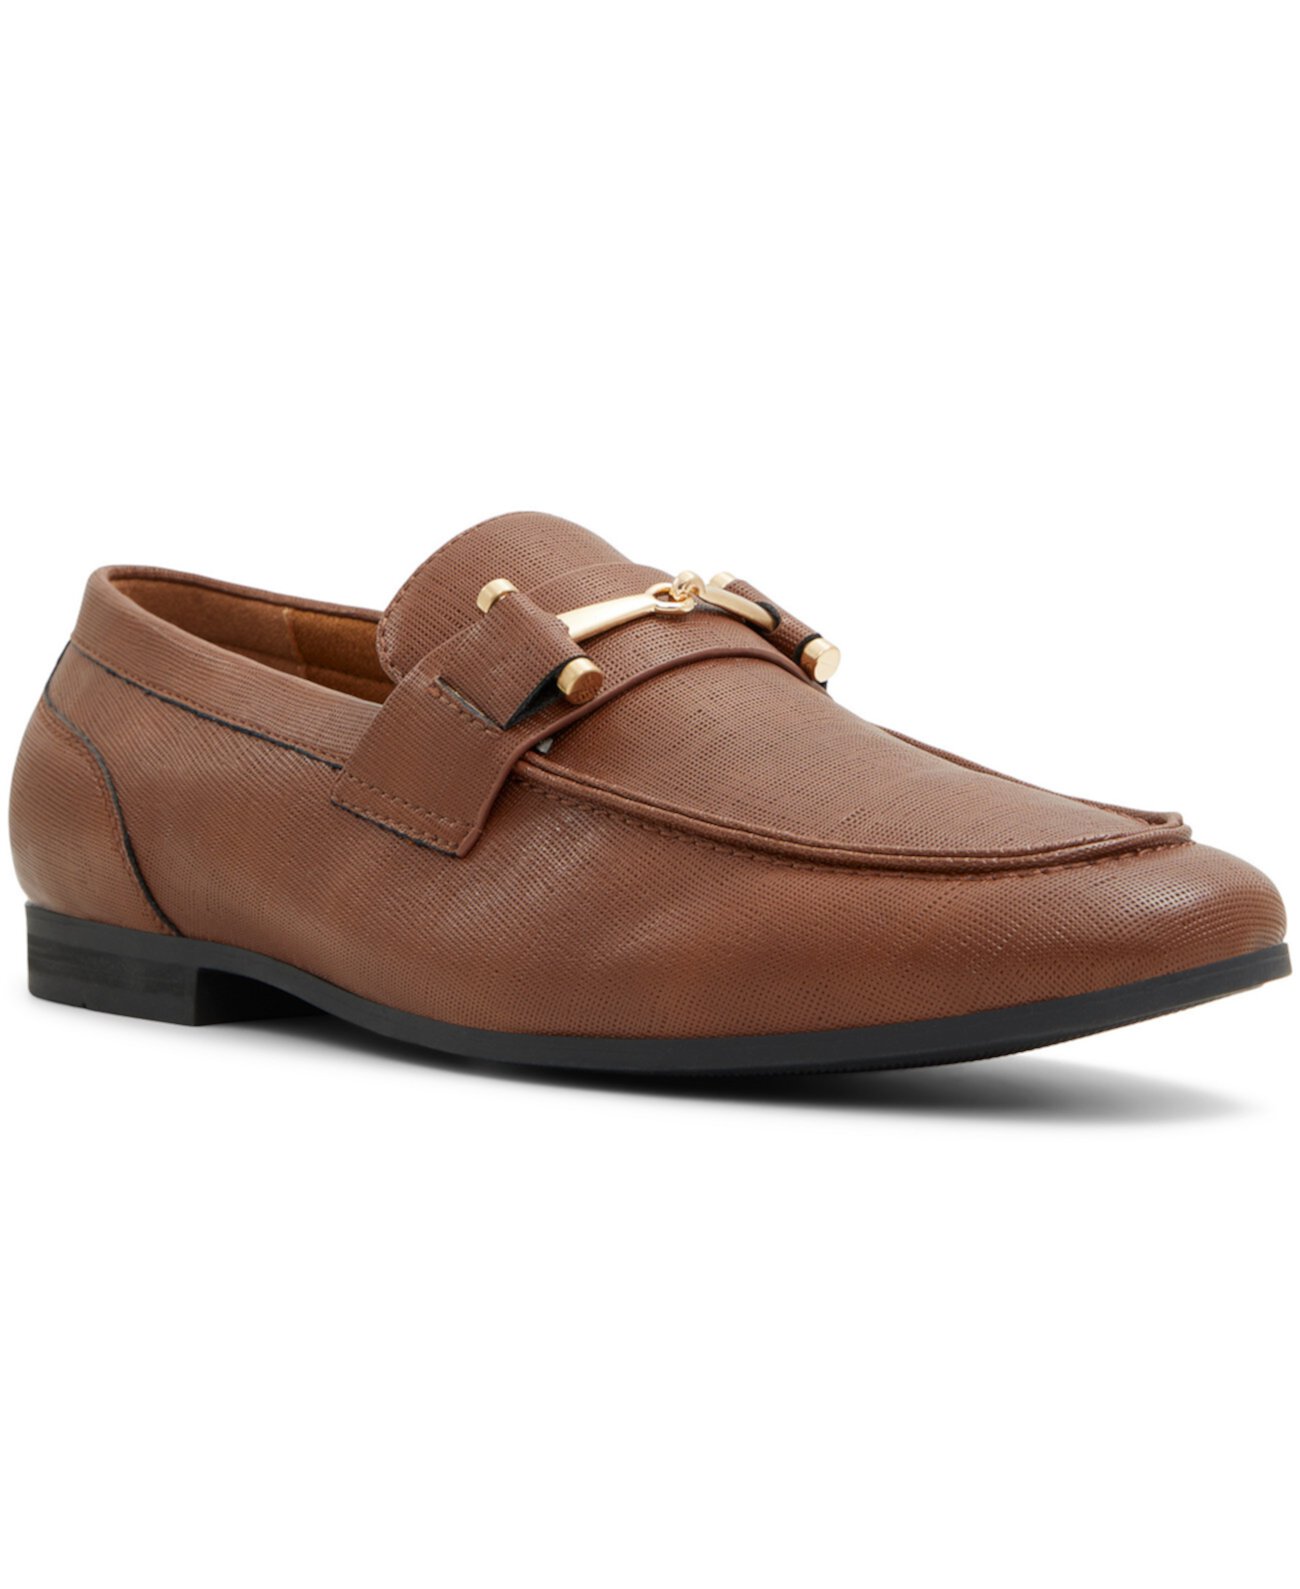 Men's Caufield H Loafers Call It Spring